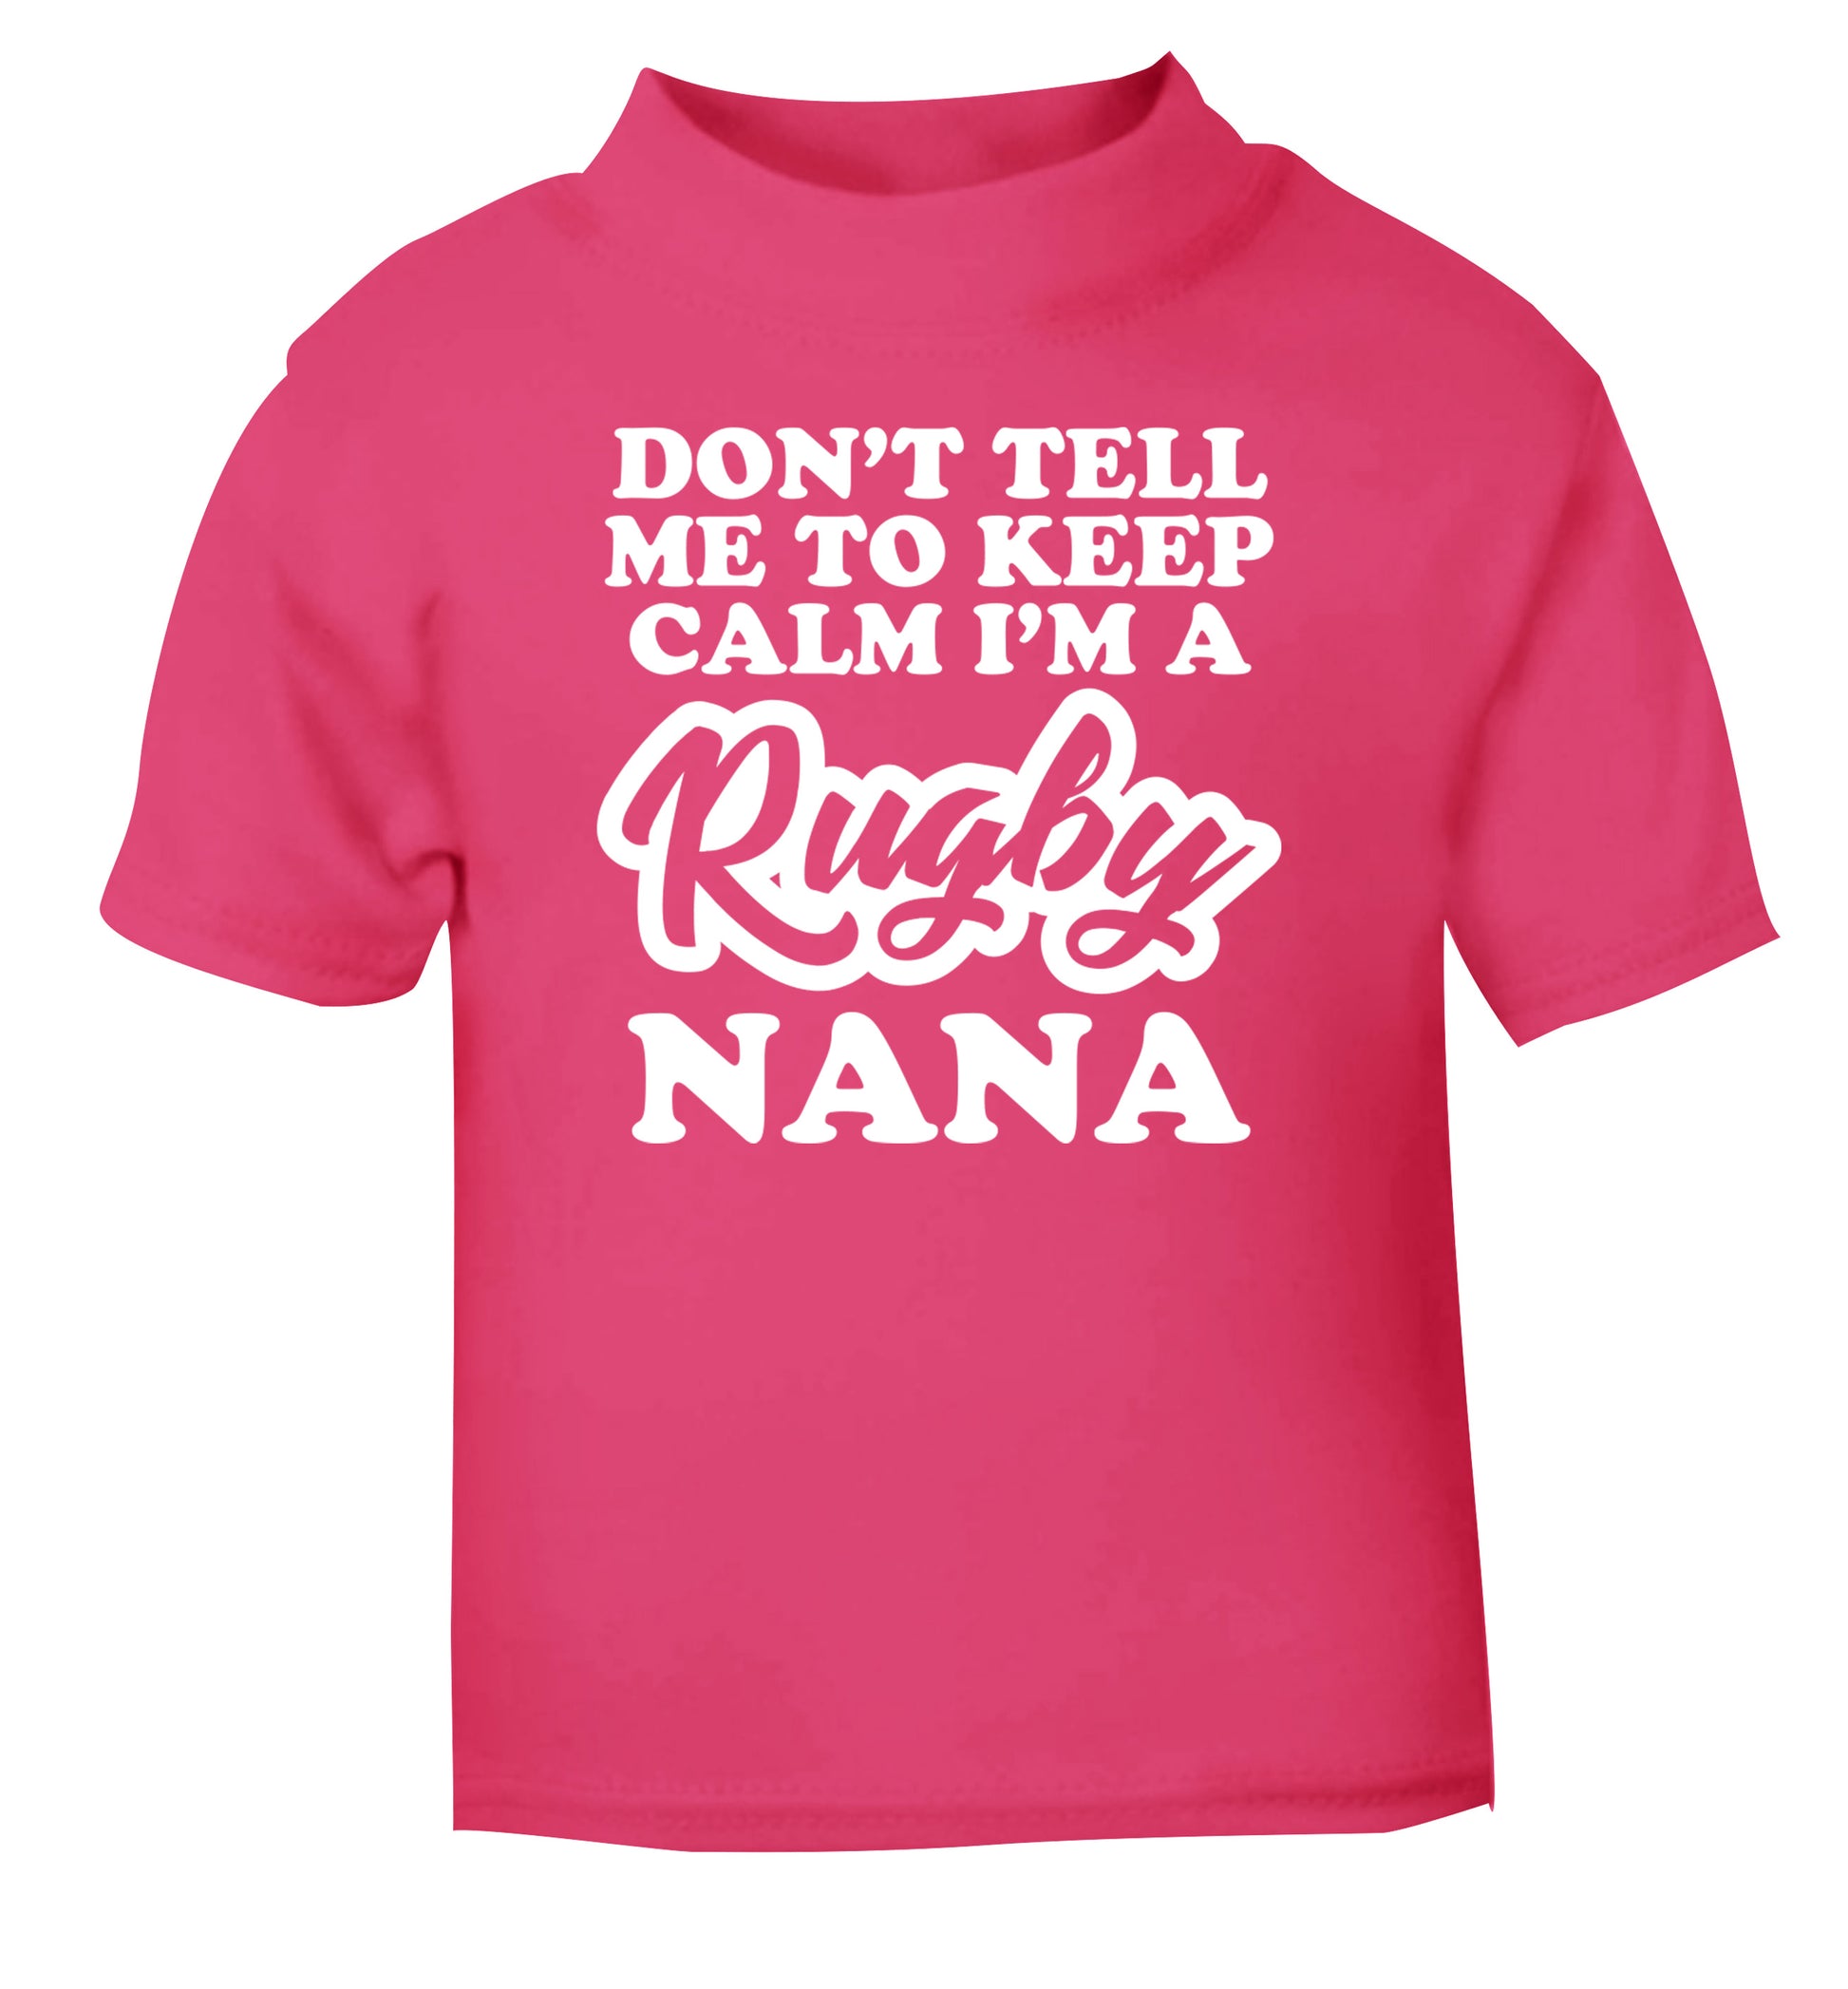 Don't tell me to keep calm I'm a rugby nana pink Baby Toddler Tshirt 2 Years